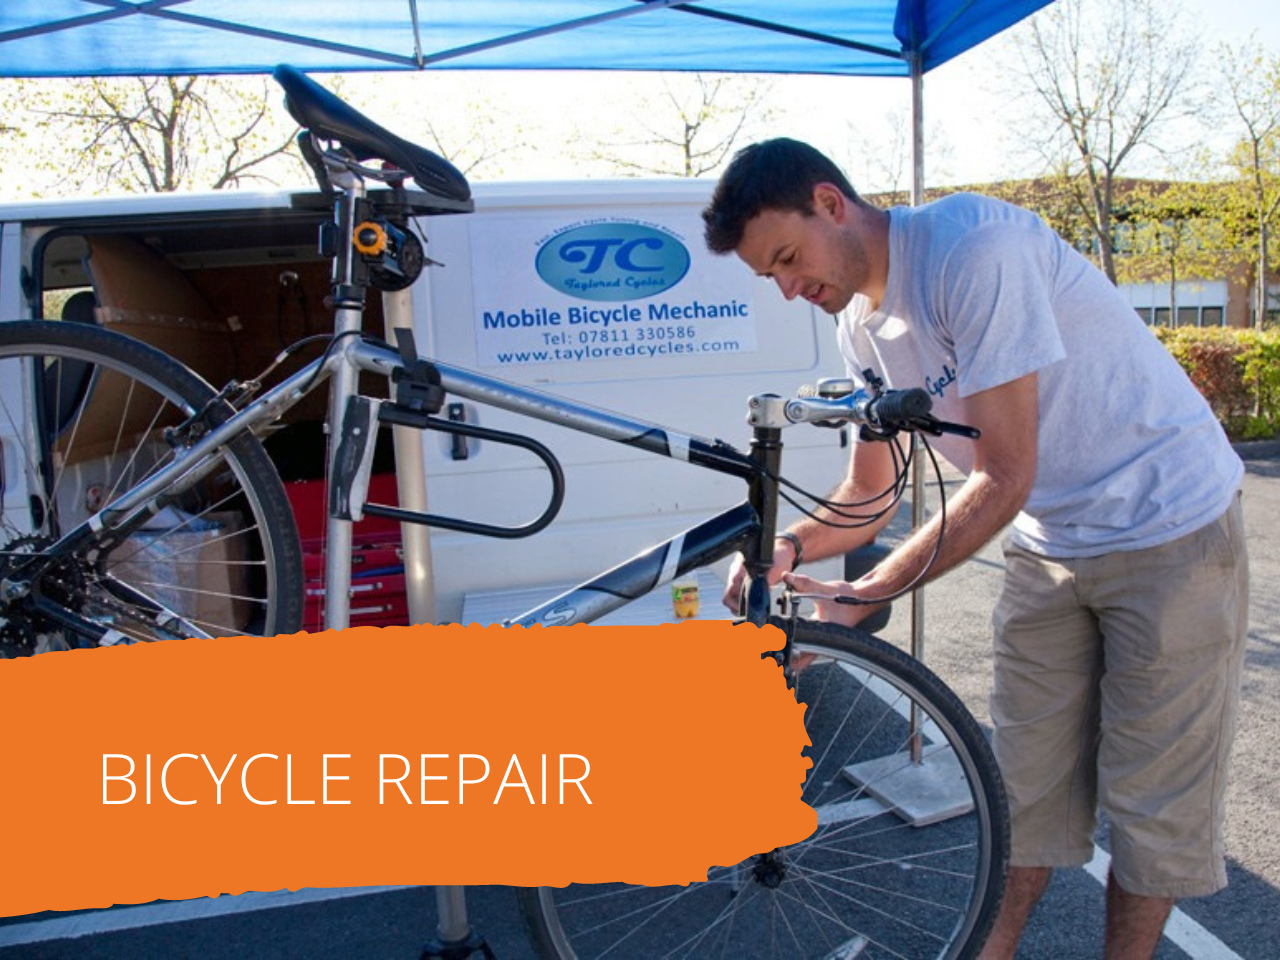 Bicycle Repair With Taylored Cycles